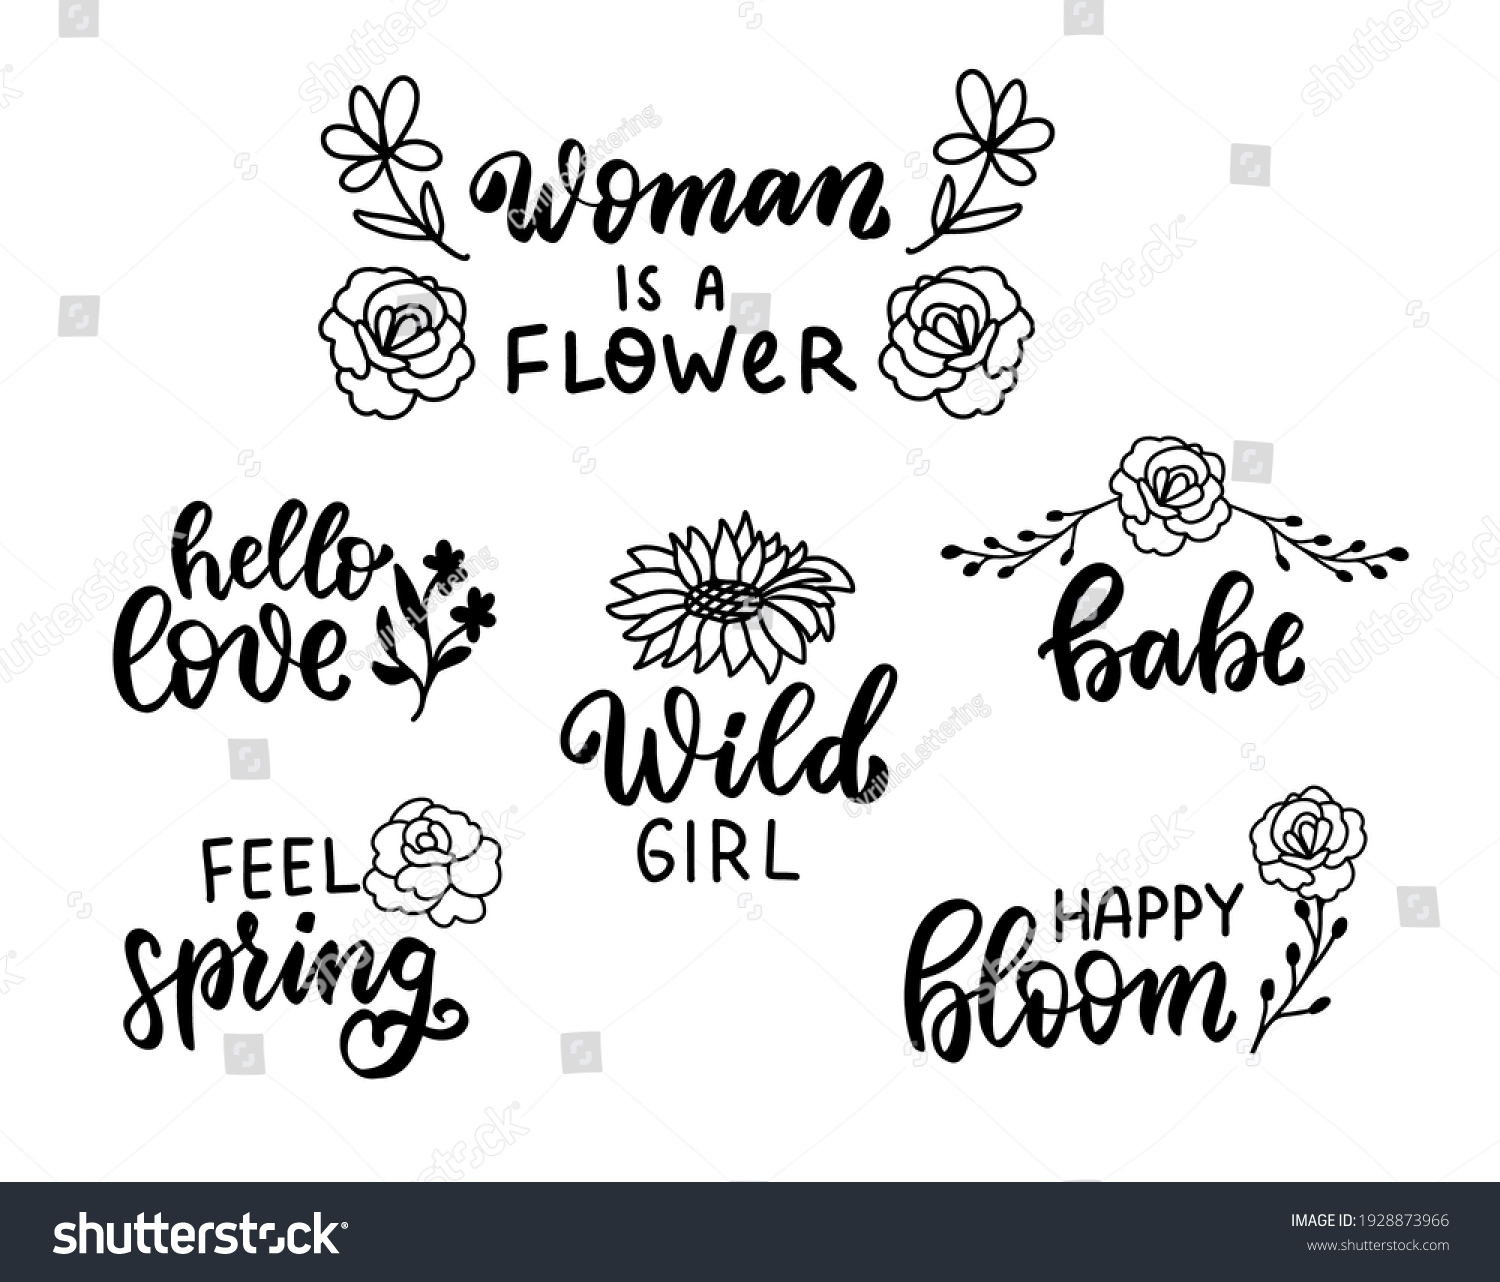 SVG of Woman is a flower. Happy bloom. Feel spring. Wildflowers t shirt design set. Boho hand lettering quotes set. Spring flowers. Bohemian, hippie concept. Romantic love mother day overlay svg